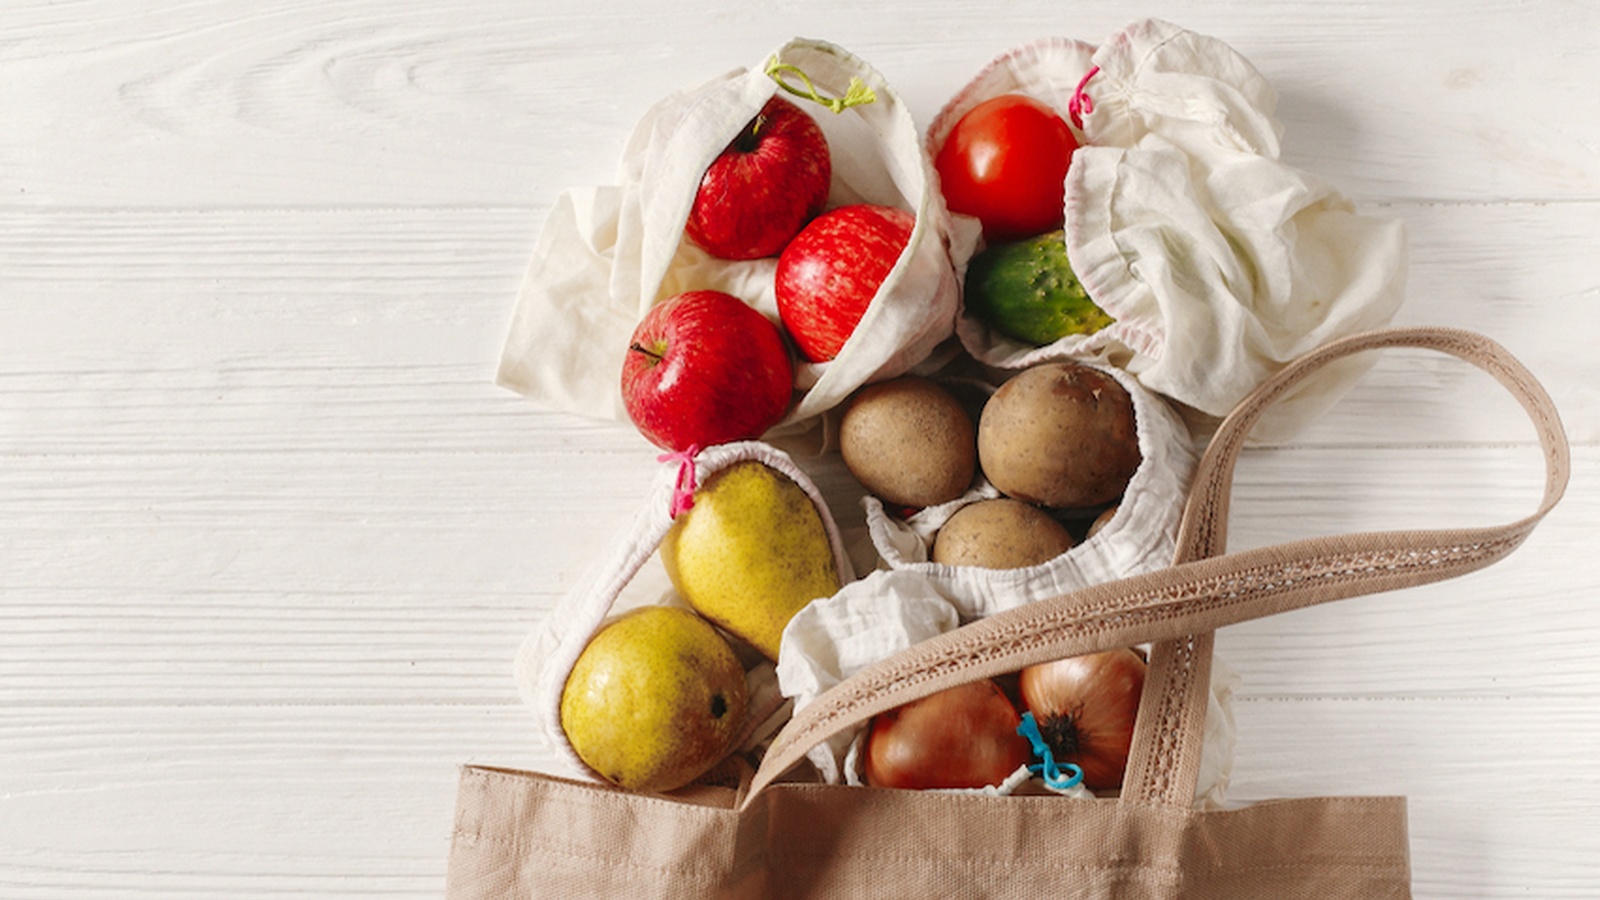 UK’s First Plastic-Free Supermarket Zone & How You Can Help